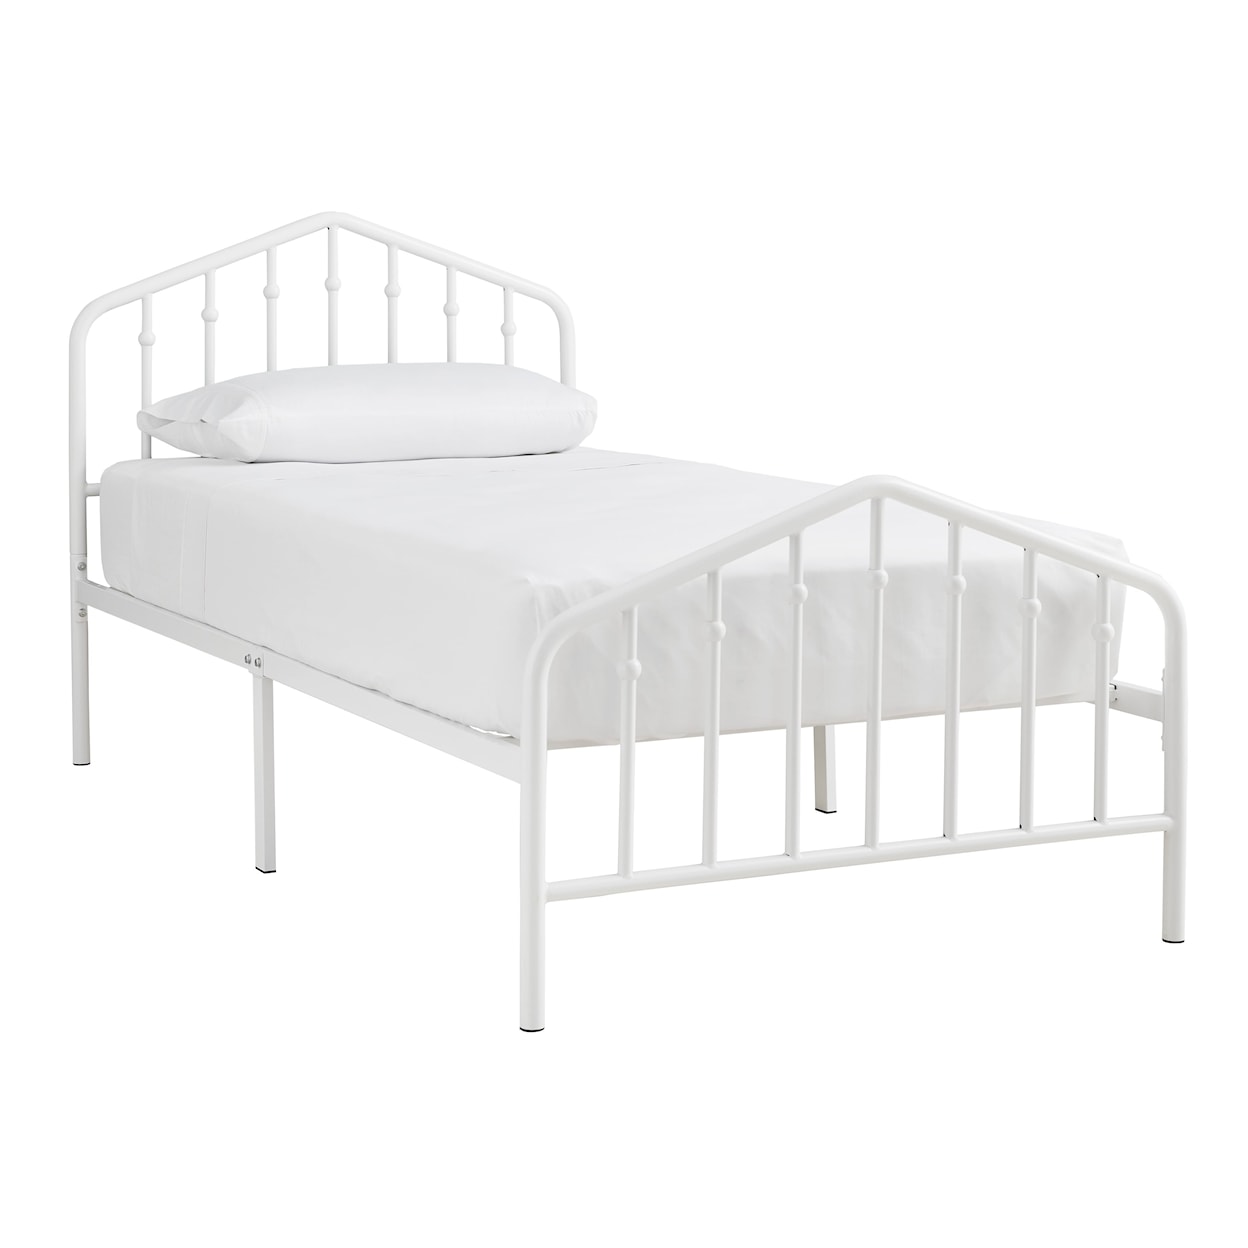 Signature Design by Ashley Furniture Trentlore Twin Metal Bed